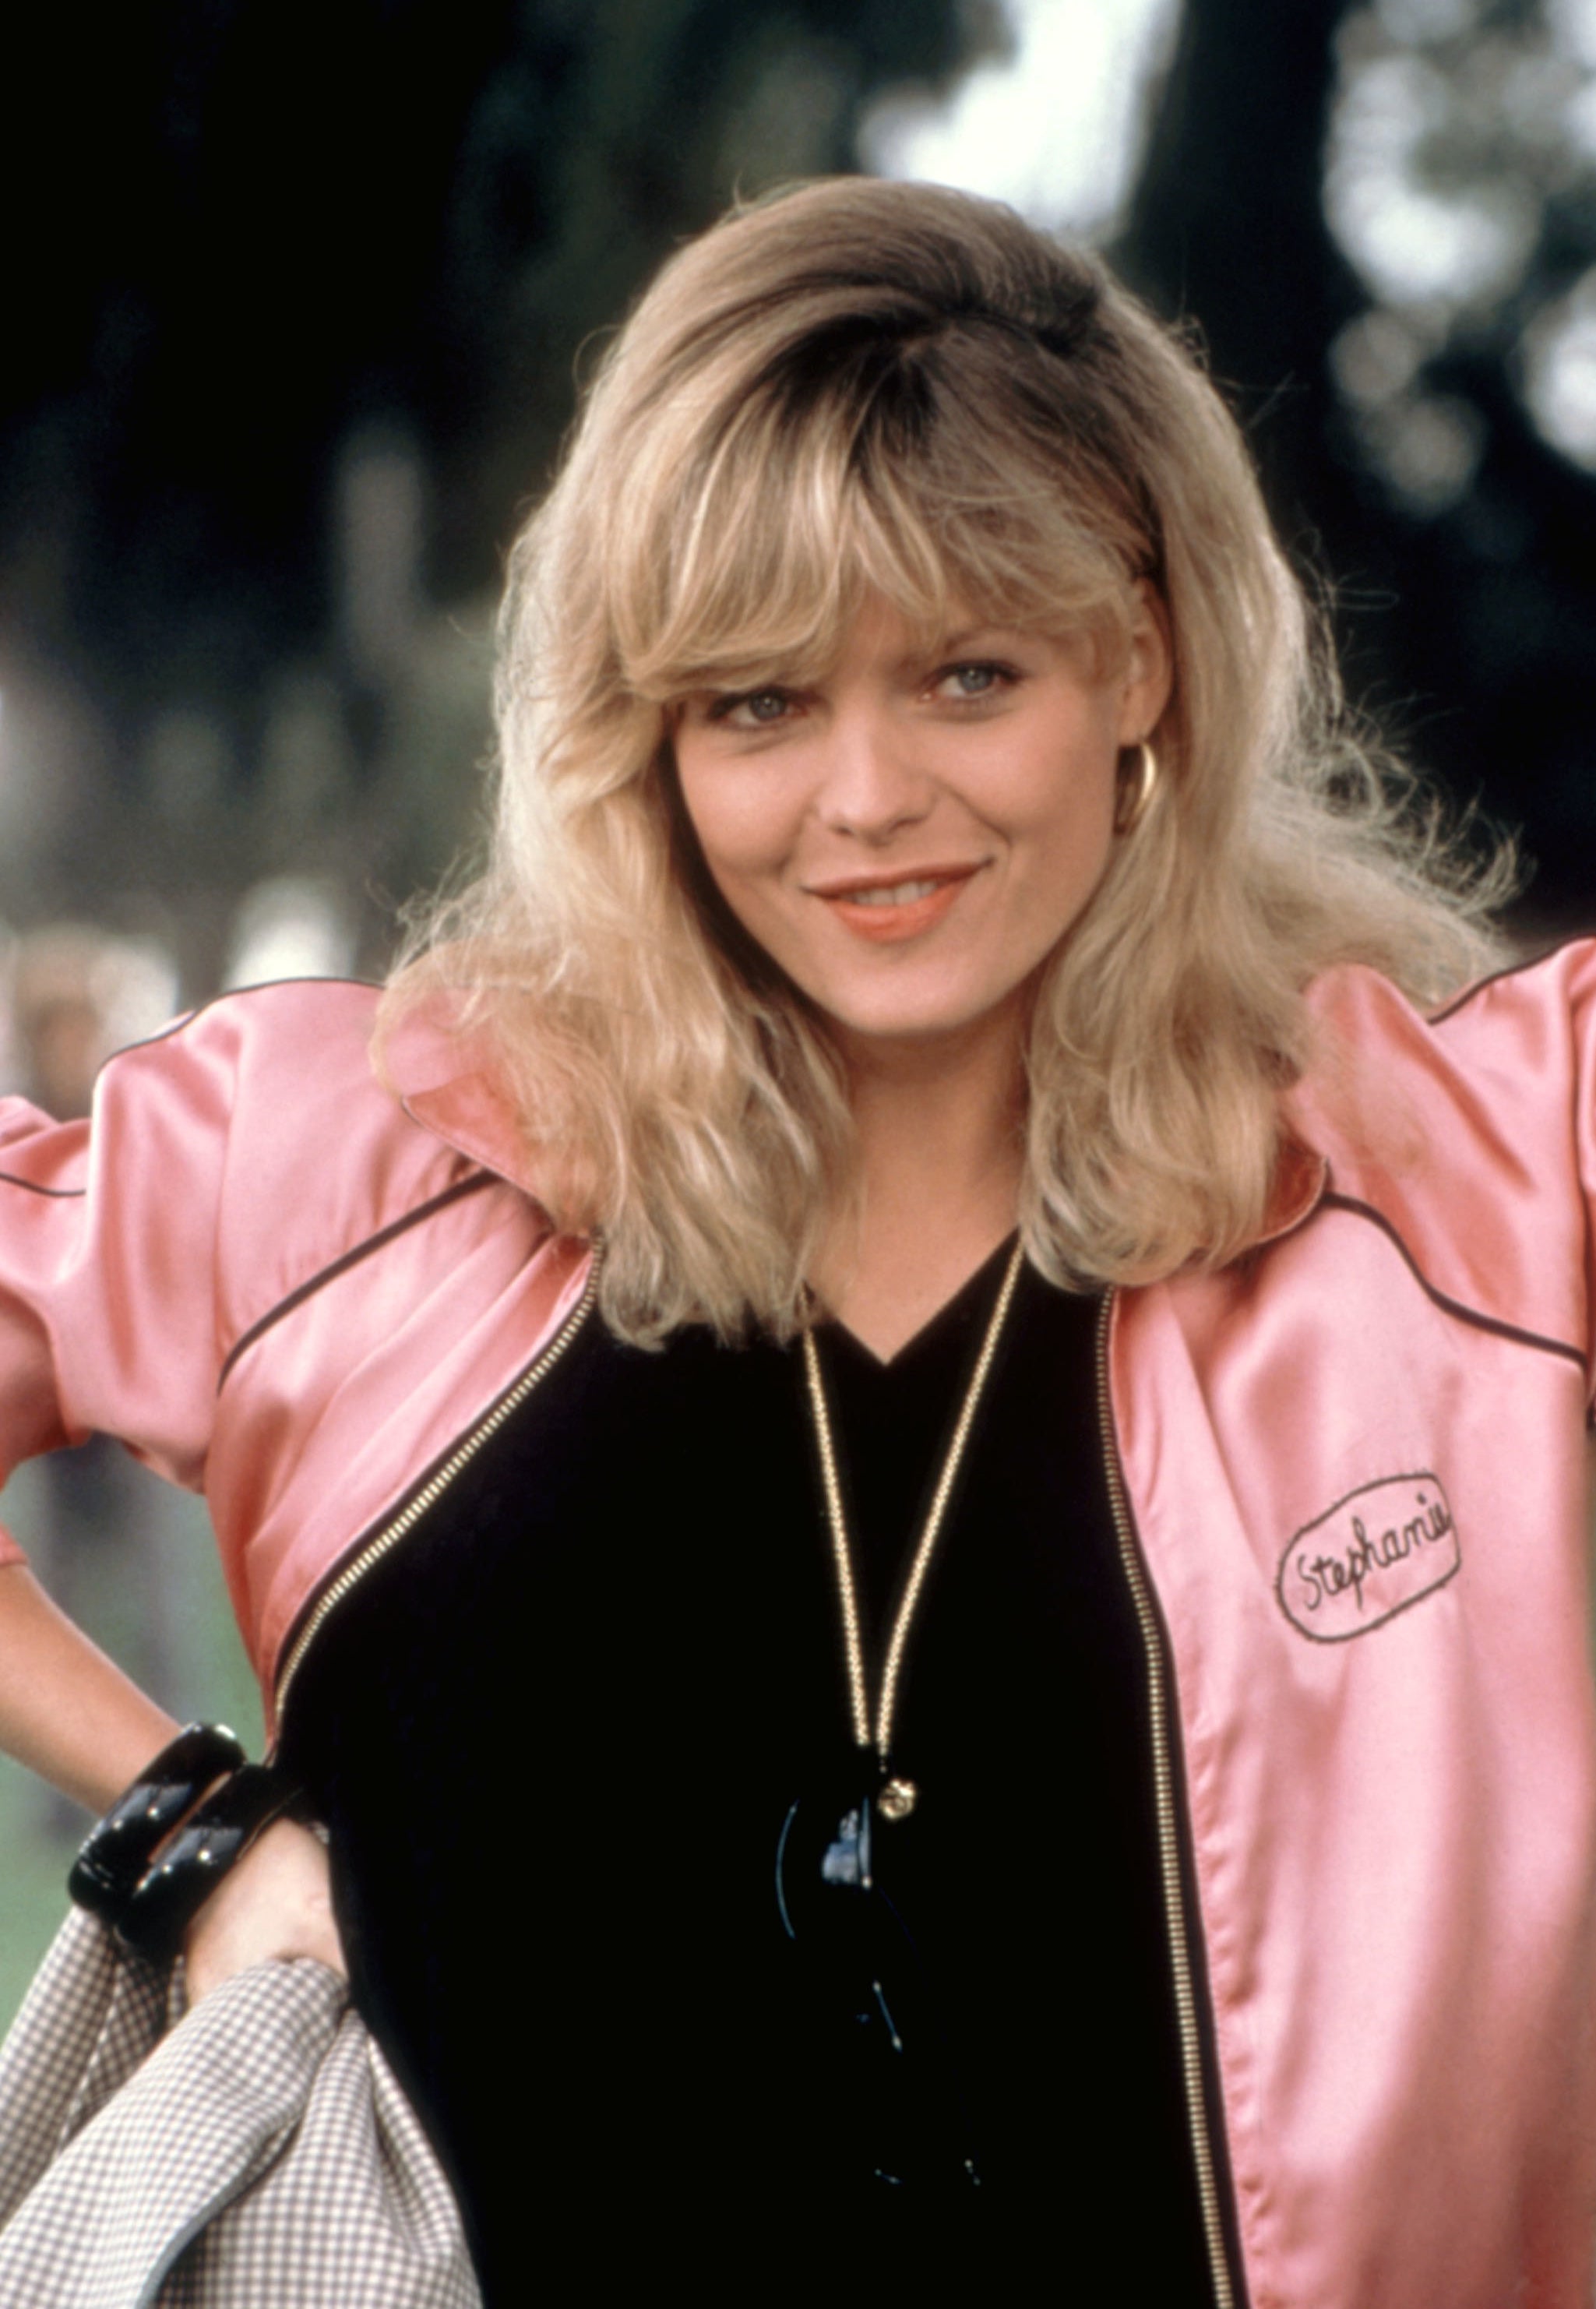 Michelle Pfeiffer in &quot;Grease 2&quot; wearing a bright pink jacket that says, &quot;Stephanie&quot;